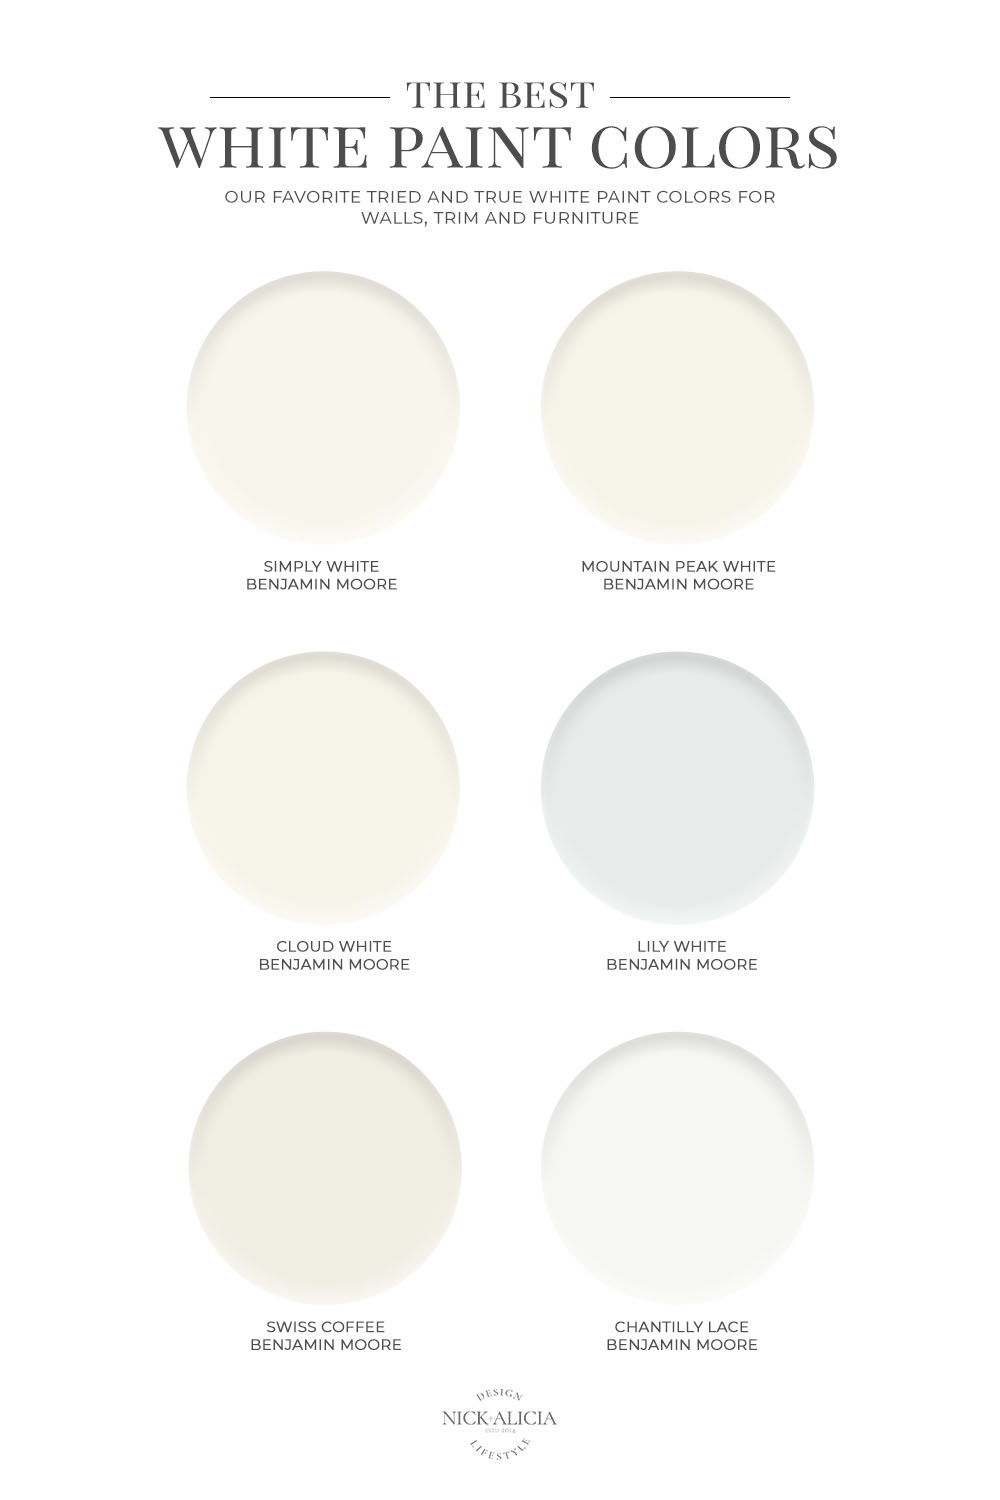 Selecting the Right White Paint Color Every Time